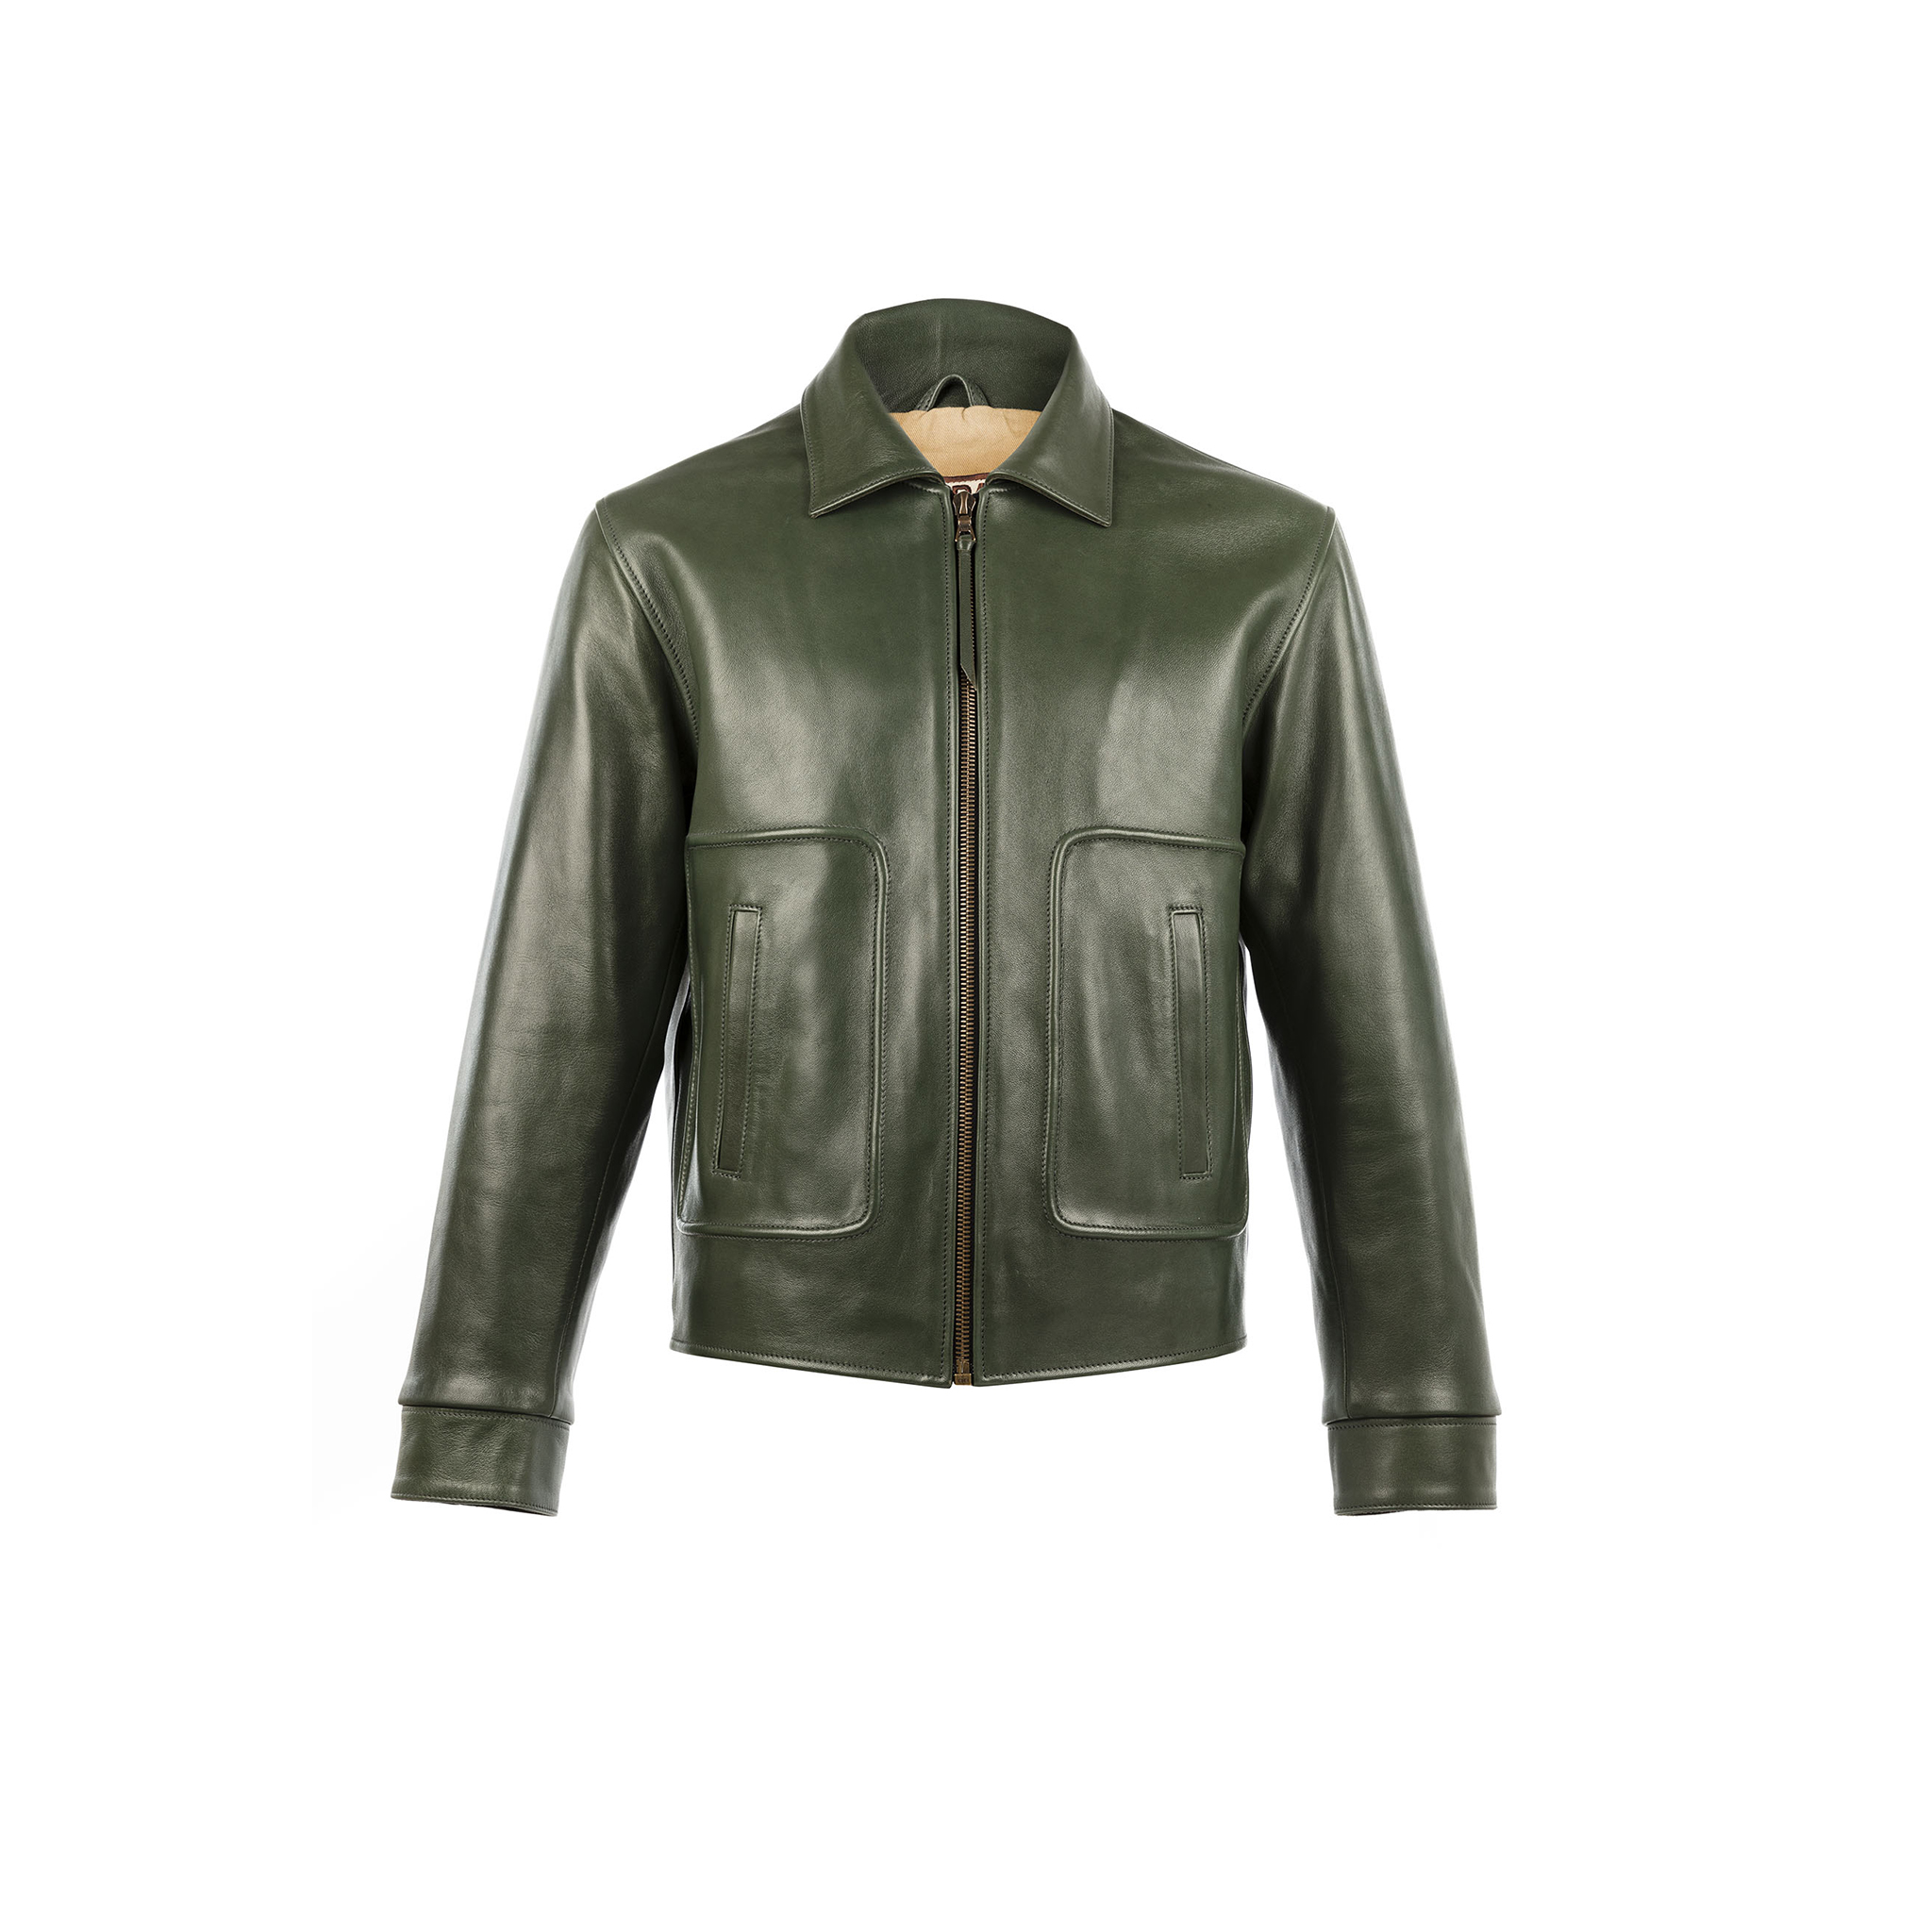 Blouson Sport Jacket - Glossy leather - Green color